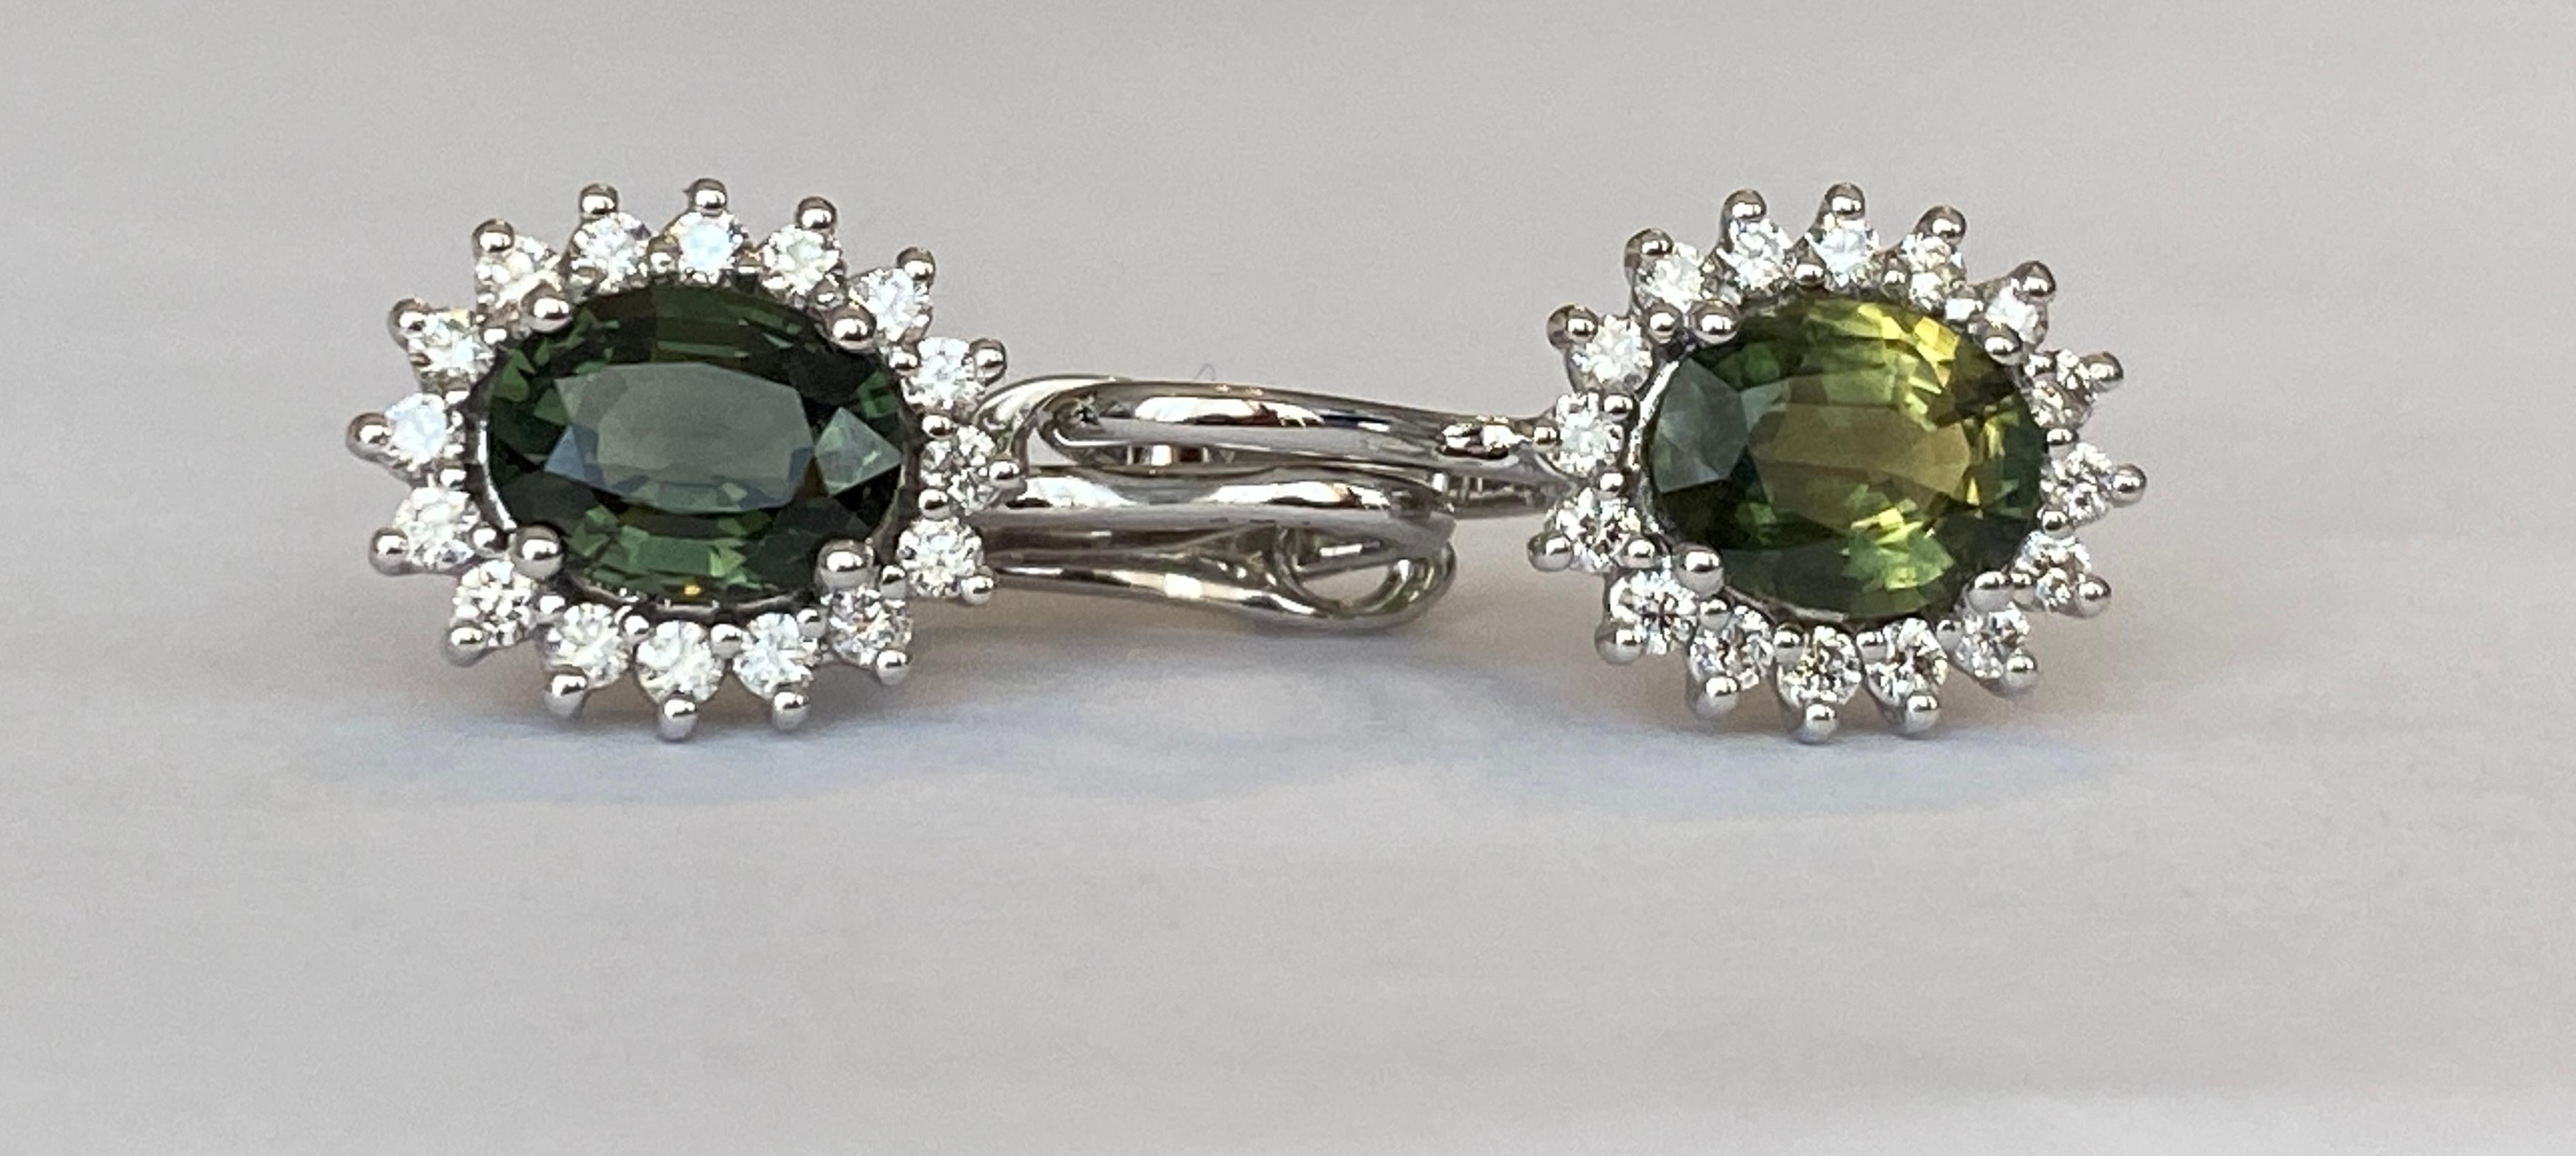 Offered earrings in white gold, with two pieces of oval cut Green sapphire of approx. 3,00 carats together. The stones are surrounded by an entourage of 32 pieces of brilliant cut diamonds, approx. 0.55 ct in total, of quality H/VS/SI.
Gold content: